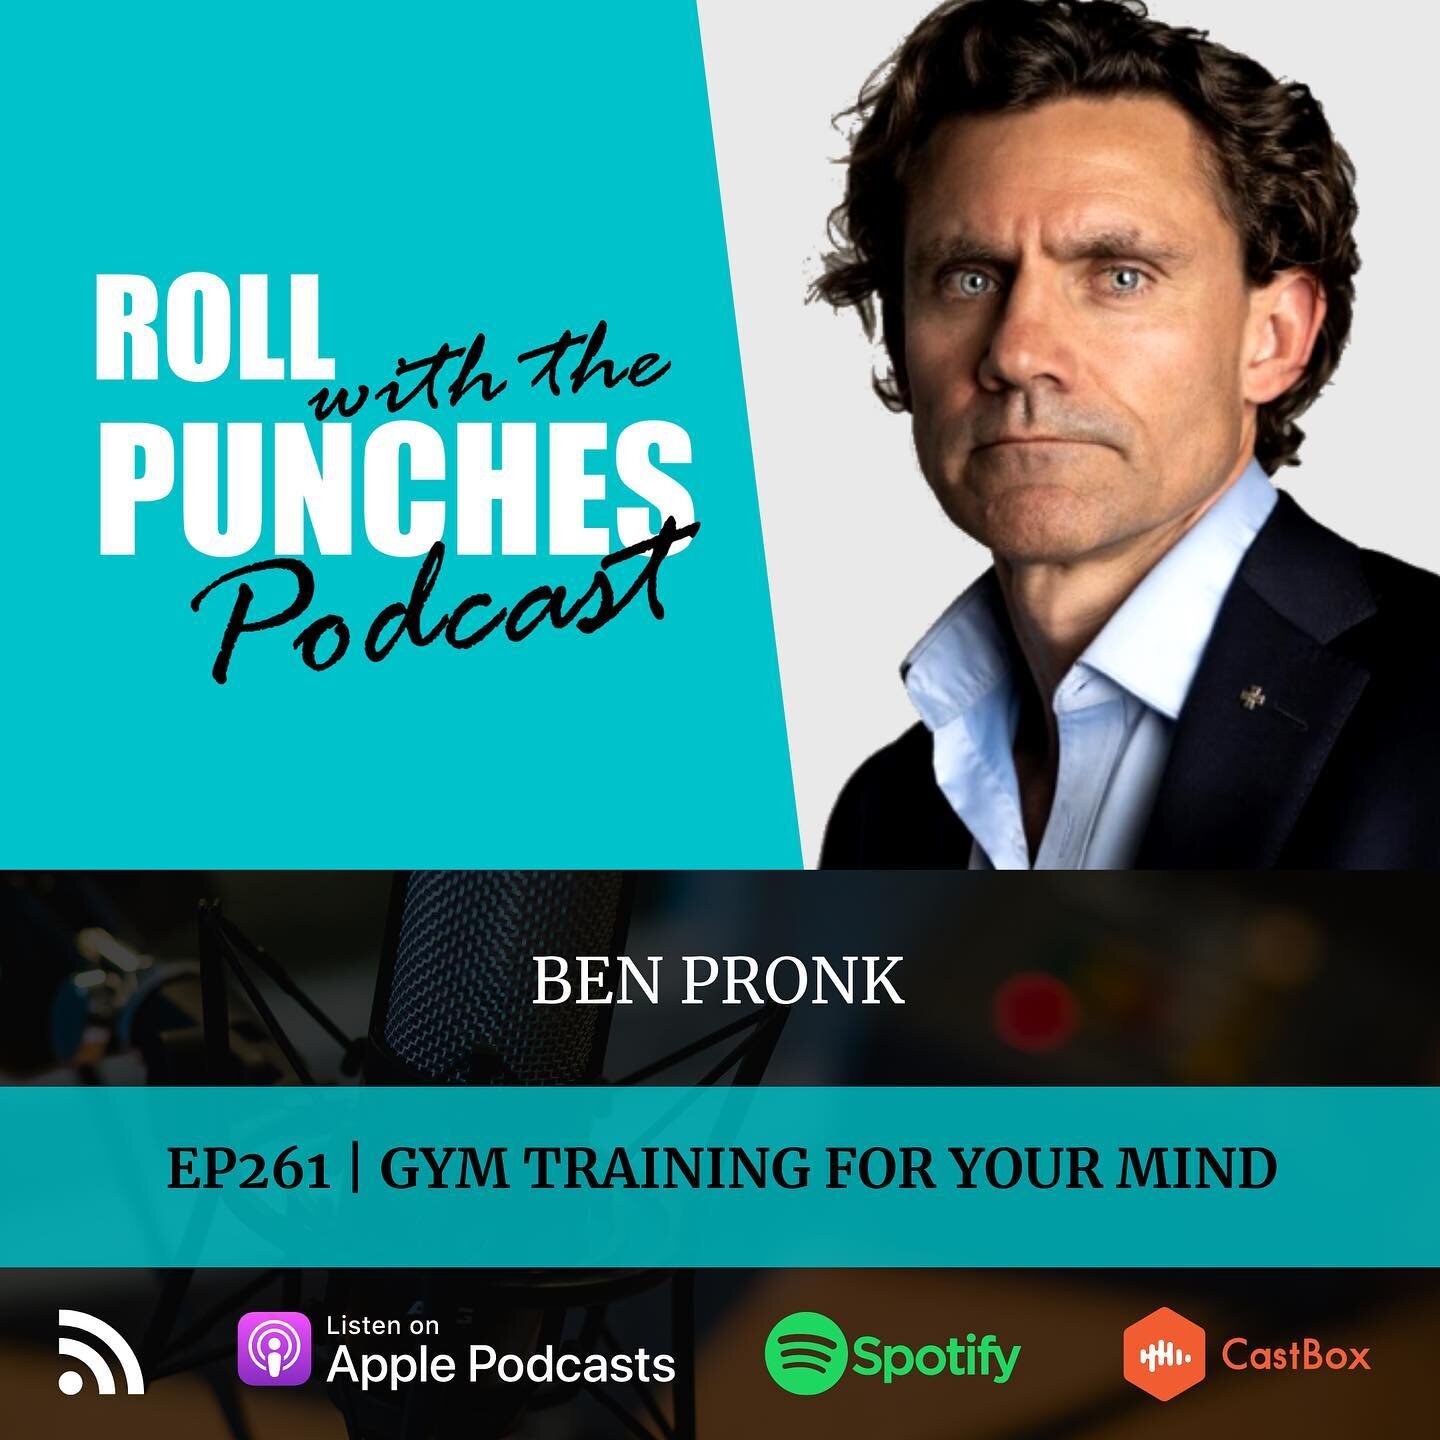 Episode 261 of the @rollwiththepunches_podcast is now live! Thank you @tiffaneeandco for bringing Ben in to talk about all things 'mental deadlifts', mindset and resilience. 

Kick-start your week the right way and give it a listen! Available on Appl